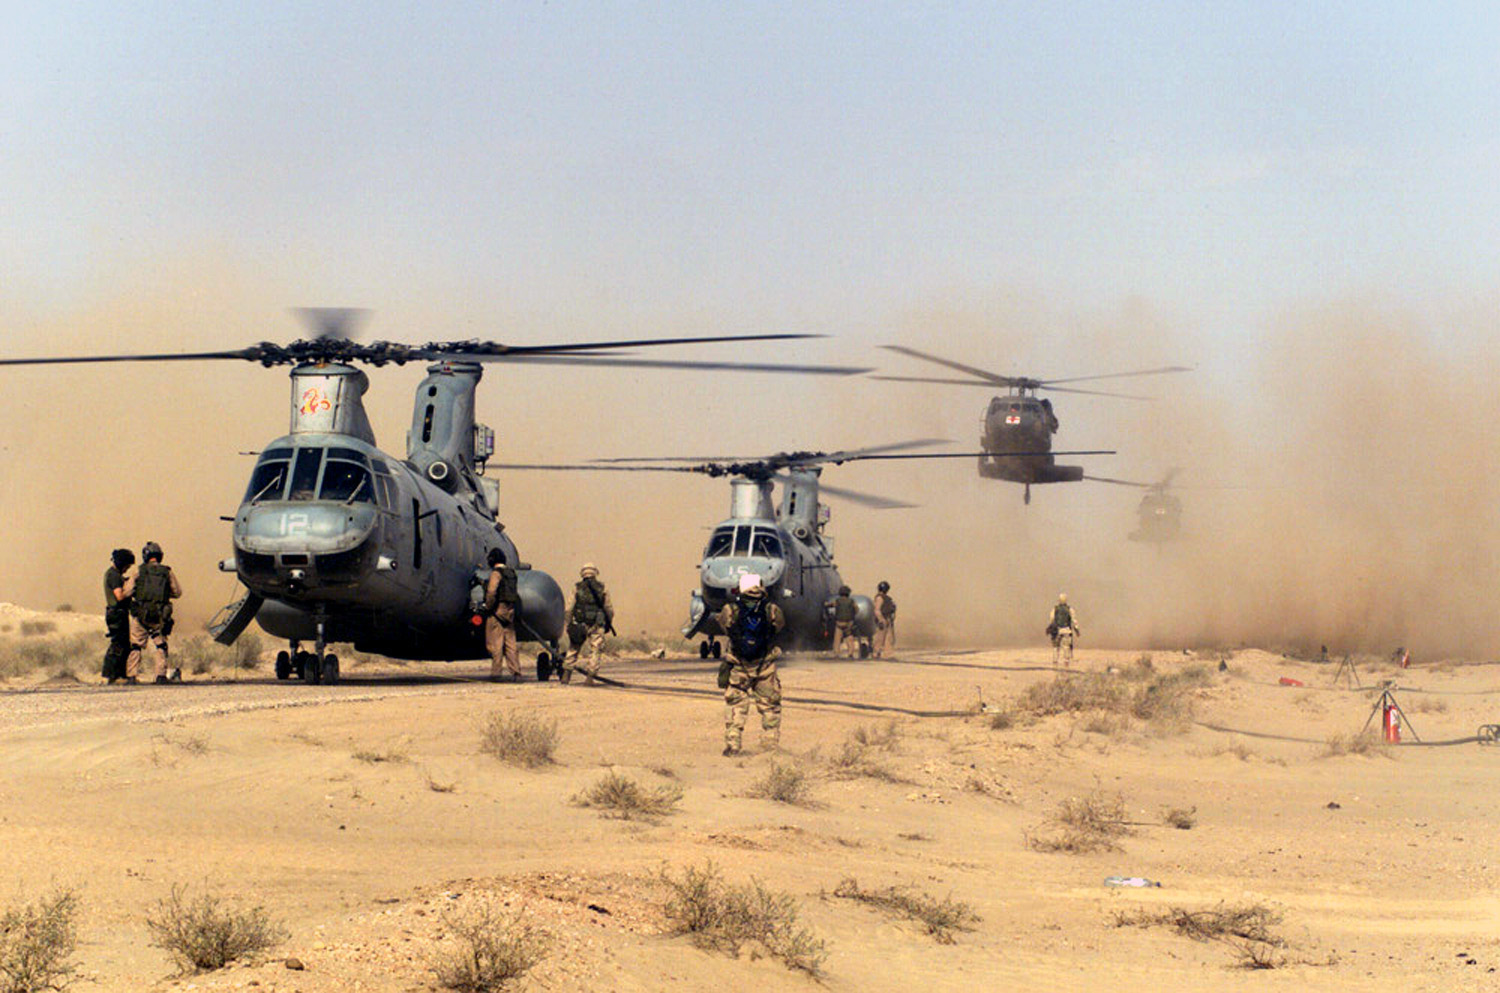 US_Navy_030325-M-3368I-005_Two_CH-46%27s_Sea_Knights_and_a_UH-60_Blackhawk_land_on_a_hardball_road_near_the_airstrip_at_Jalibah_to_take_on_additional_fuel_before_continuing_their_mission_northward.jpg